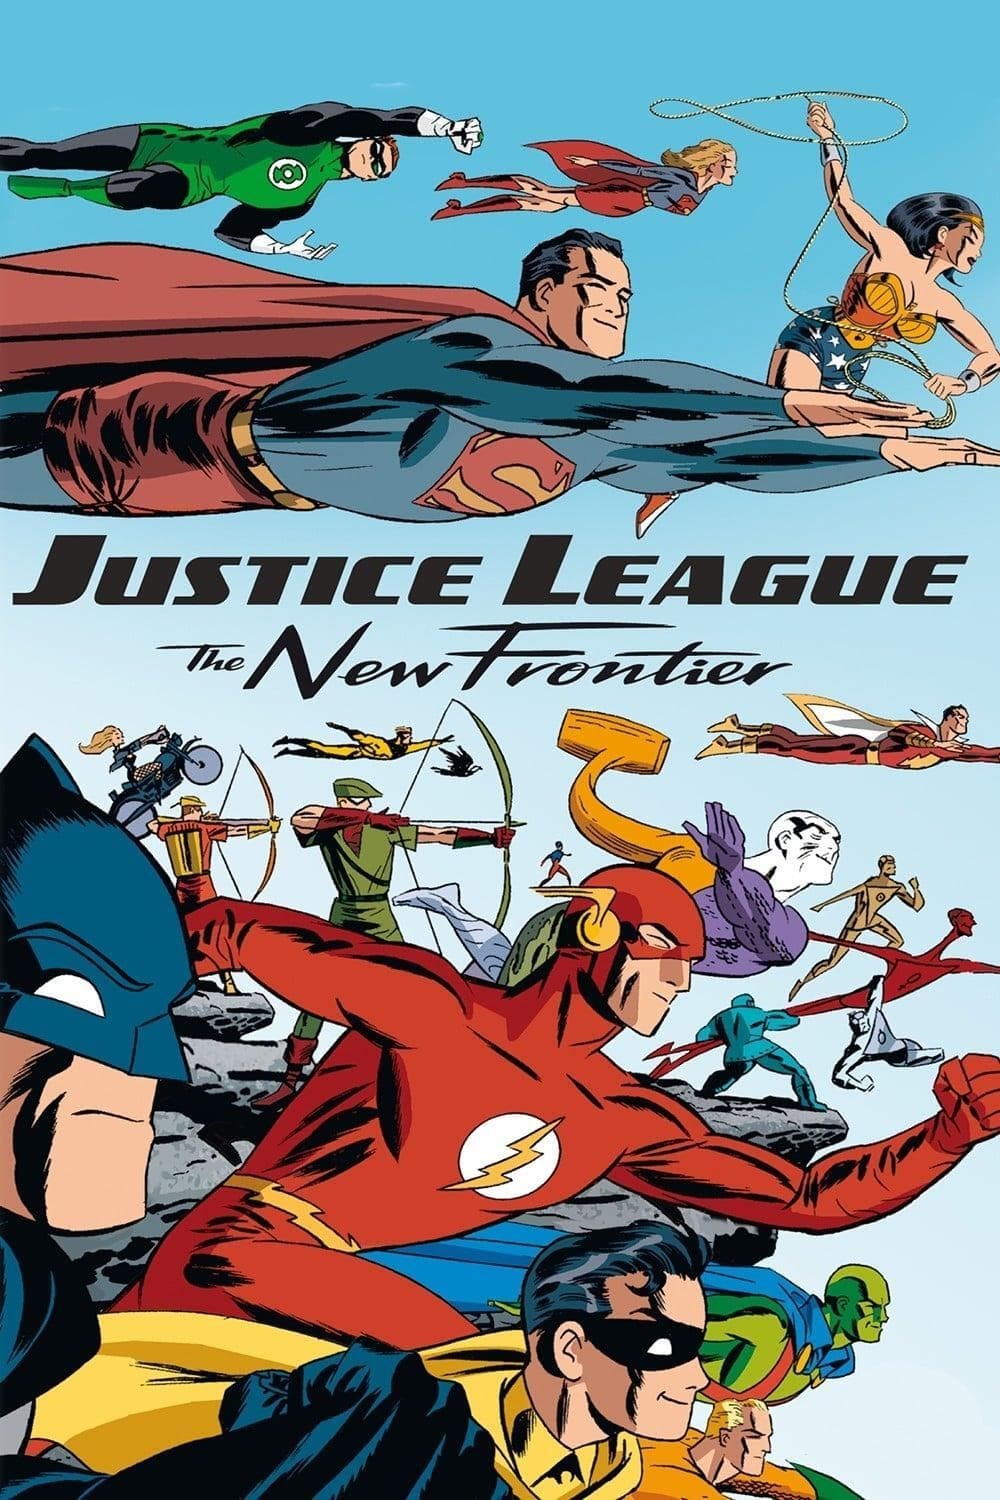 Justice League: The New Frontier - Wikipedia